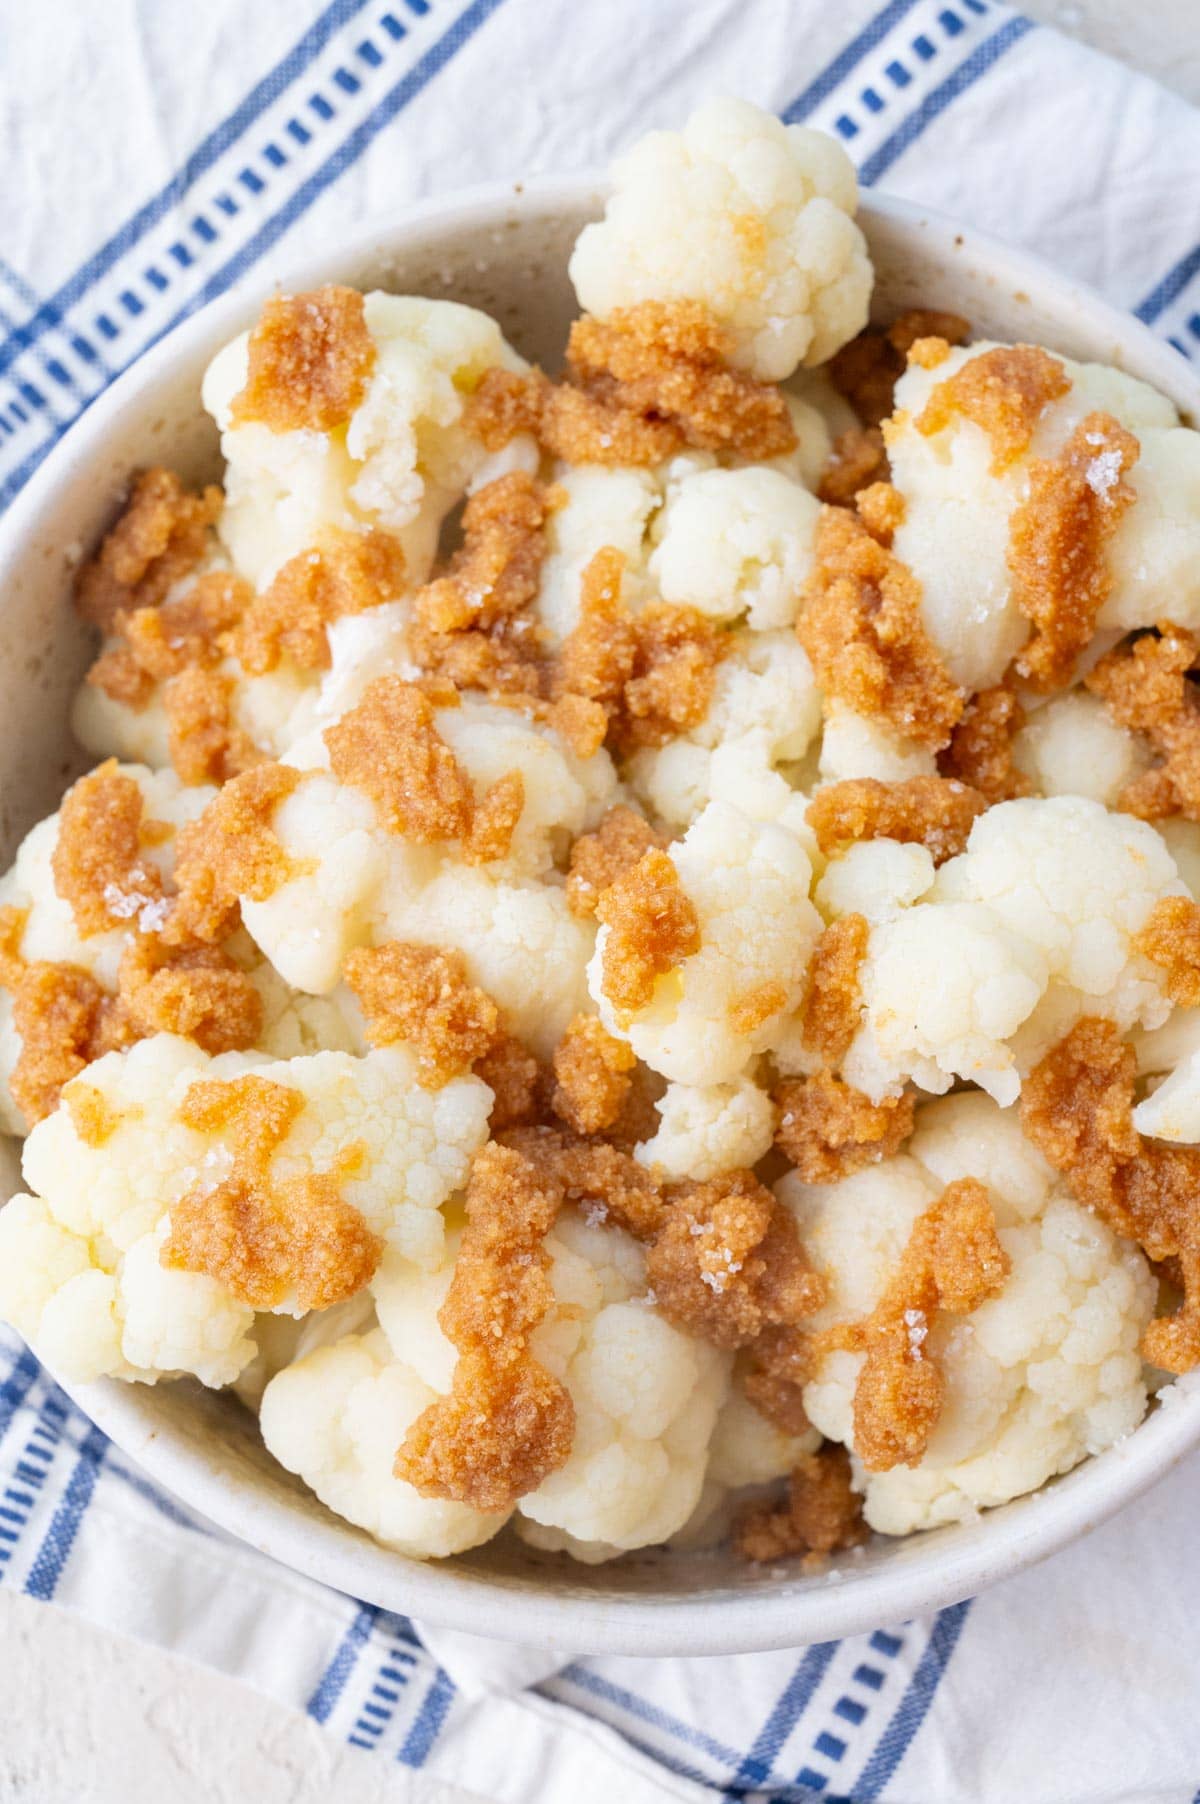 Steamed cauliflower florets topped with fried buttered breadcrumbs in a white bowl.